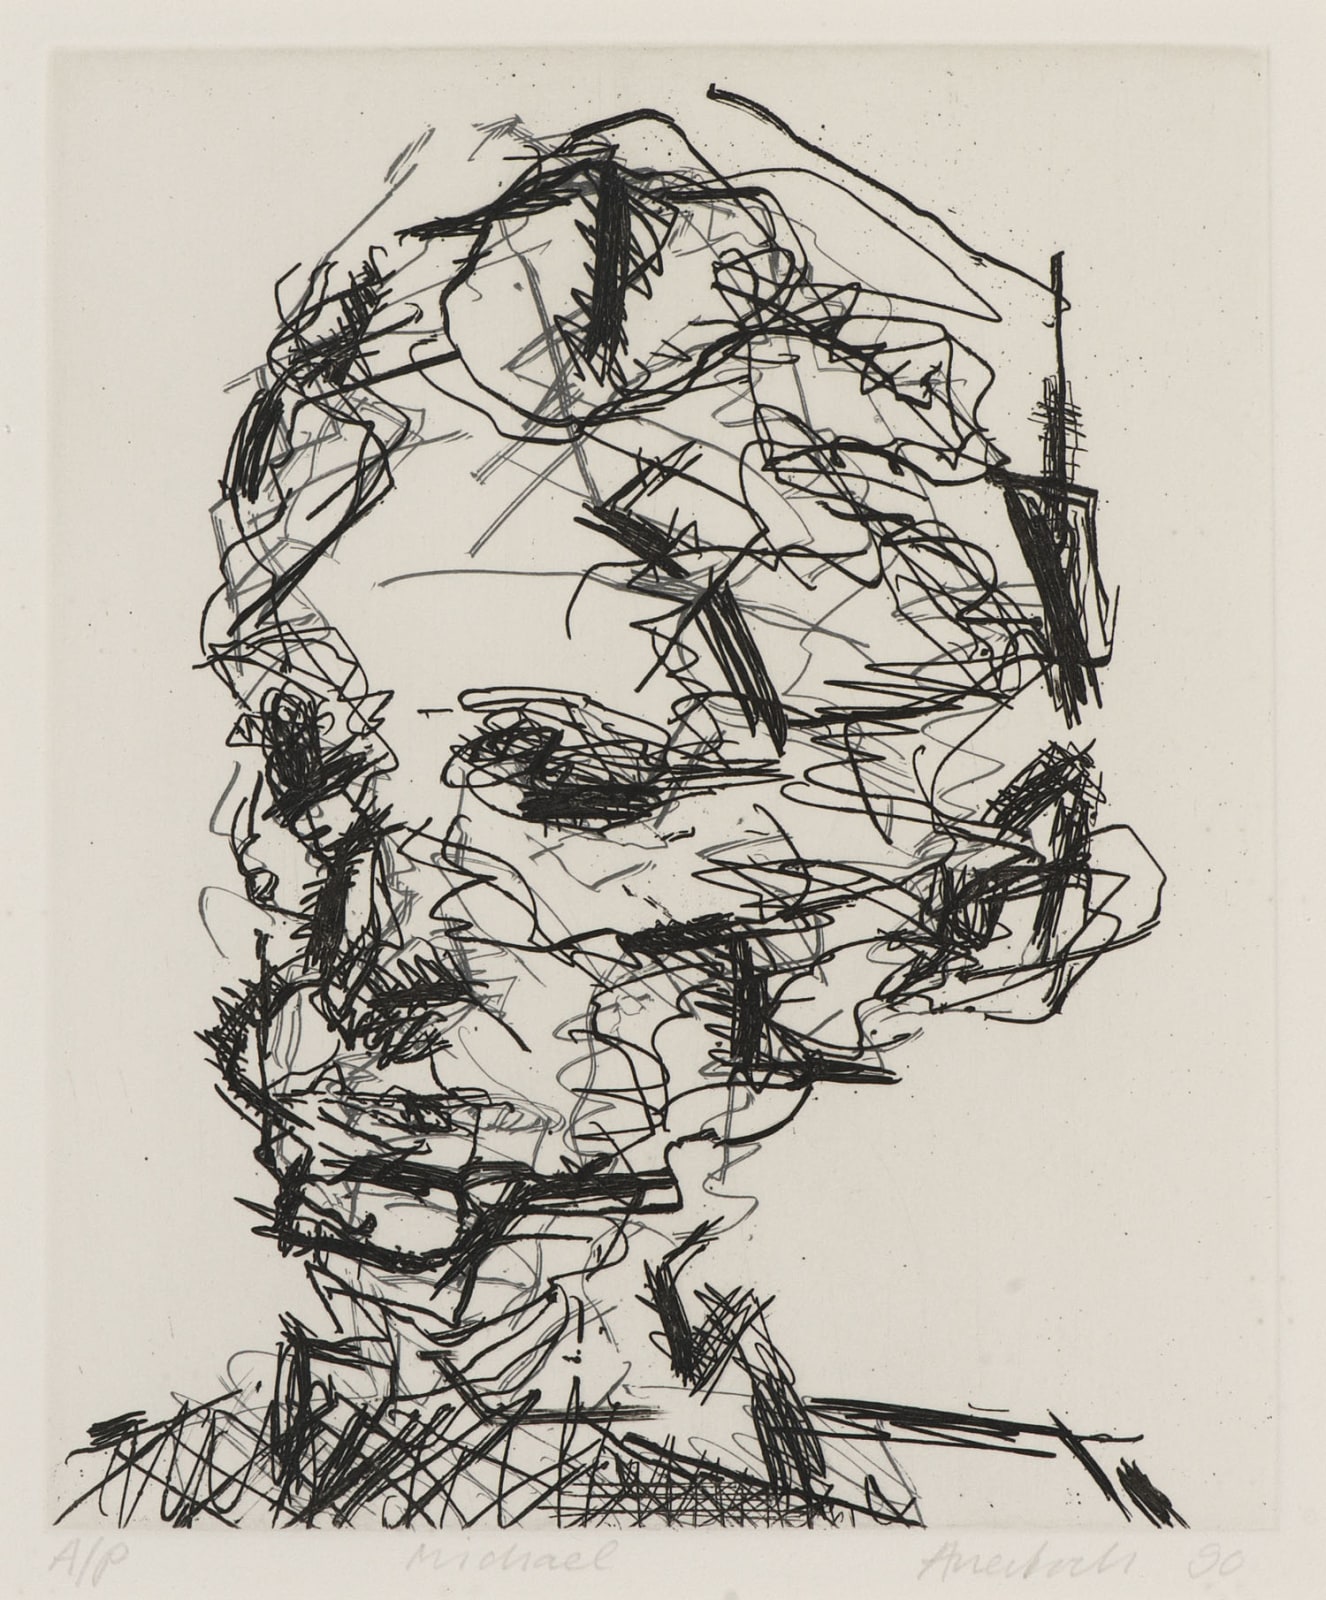 Frank Auerbach (1931-) Michael, Series: Part of Seven Portraits 1990 Etching, printed on Somerset white paper, artist's proof outside the published edition of 50 20 x 16.5 cm Ben Uri Collection © Frank Auerbach, courtesy Marlborough Fine Art To see and discover more about this artist click here